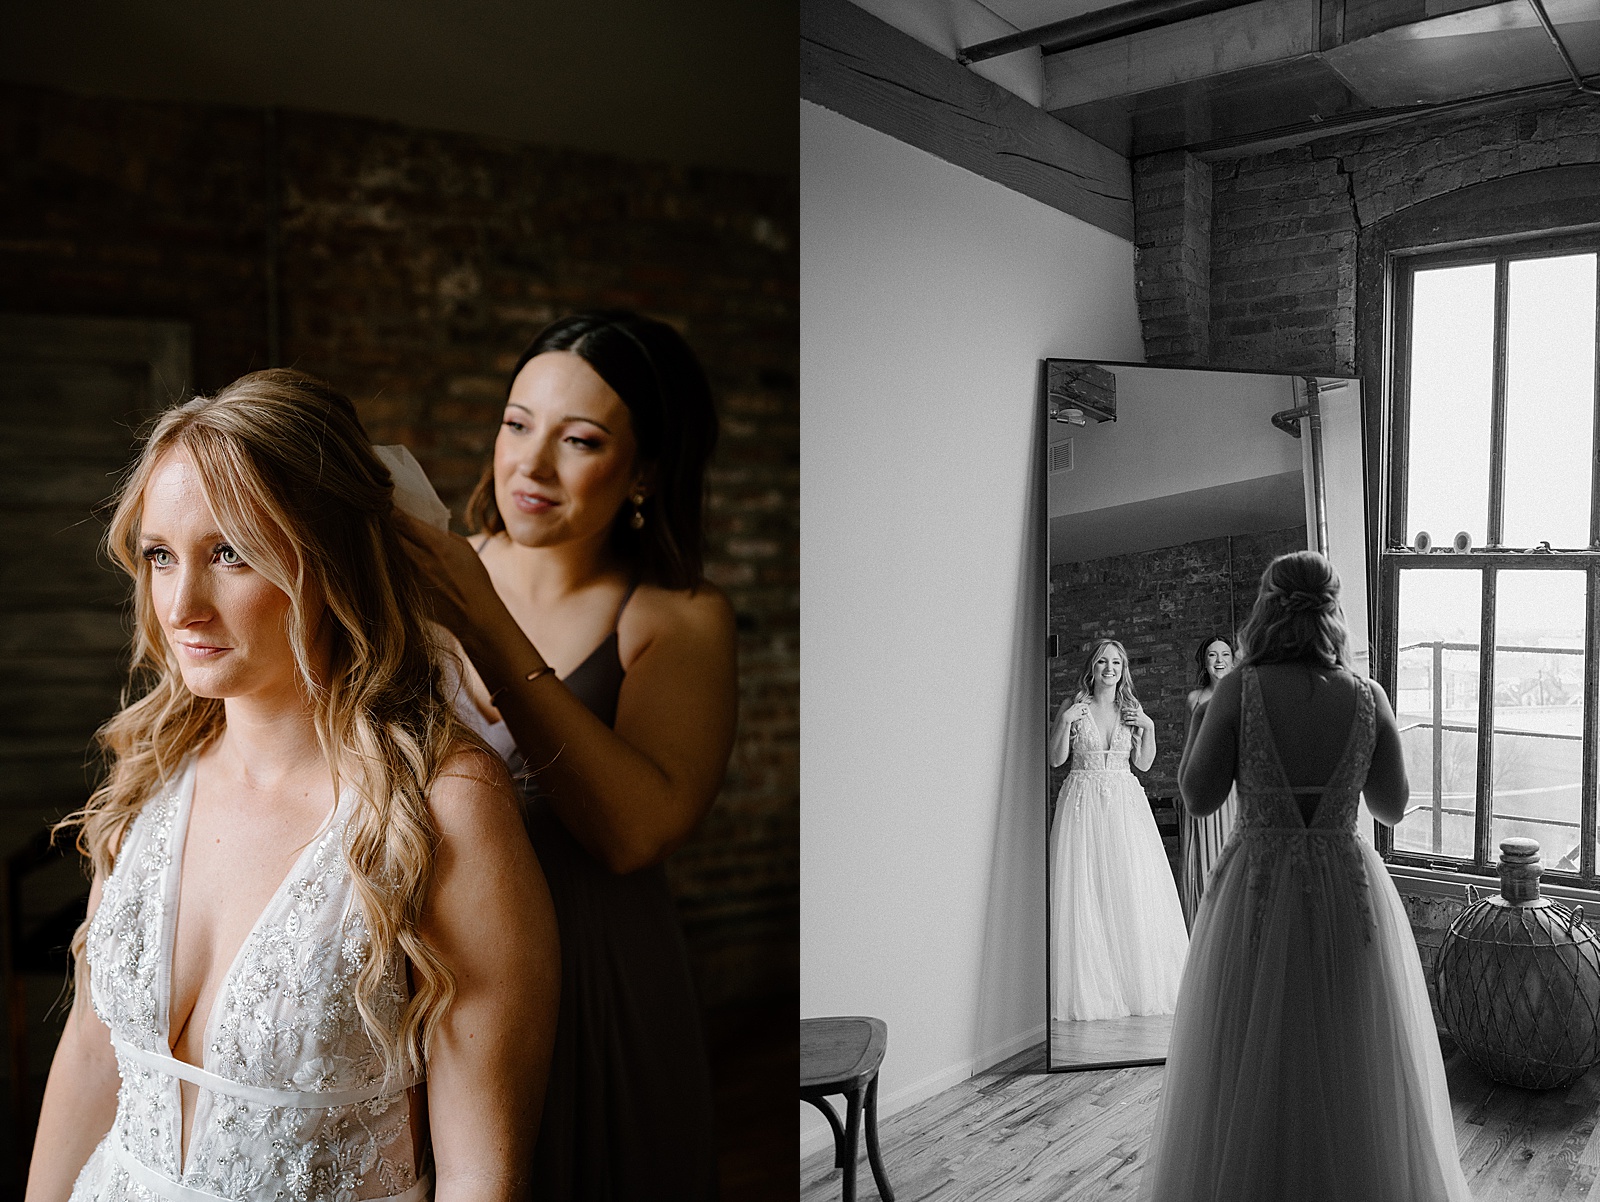 Bride getting ready before her wedding at Lacuna Lofts